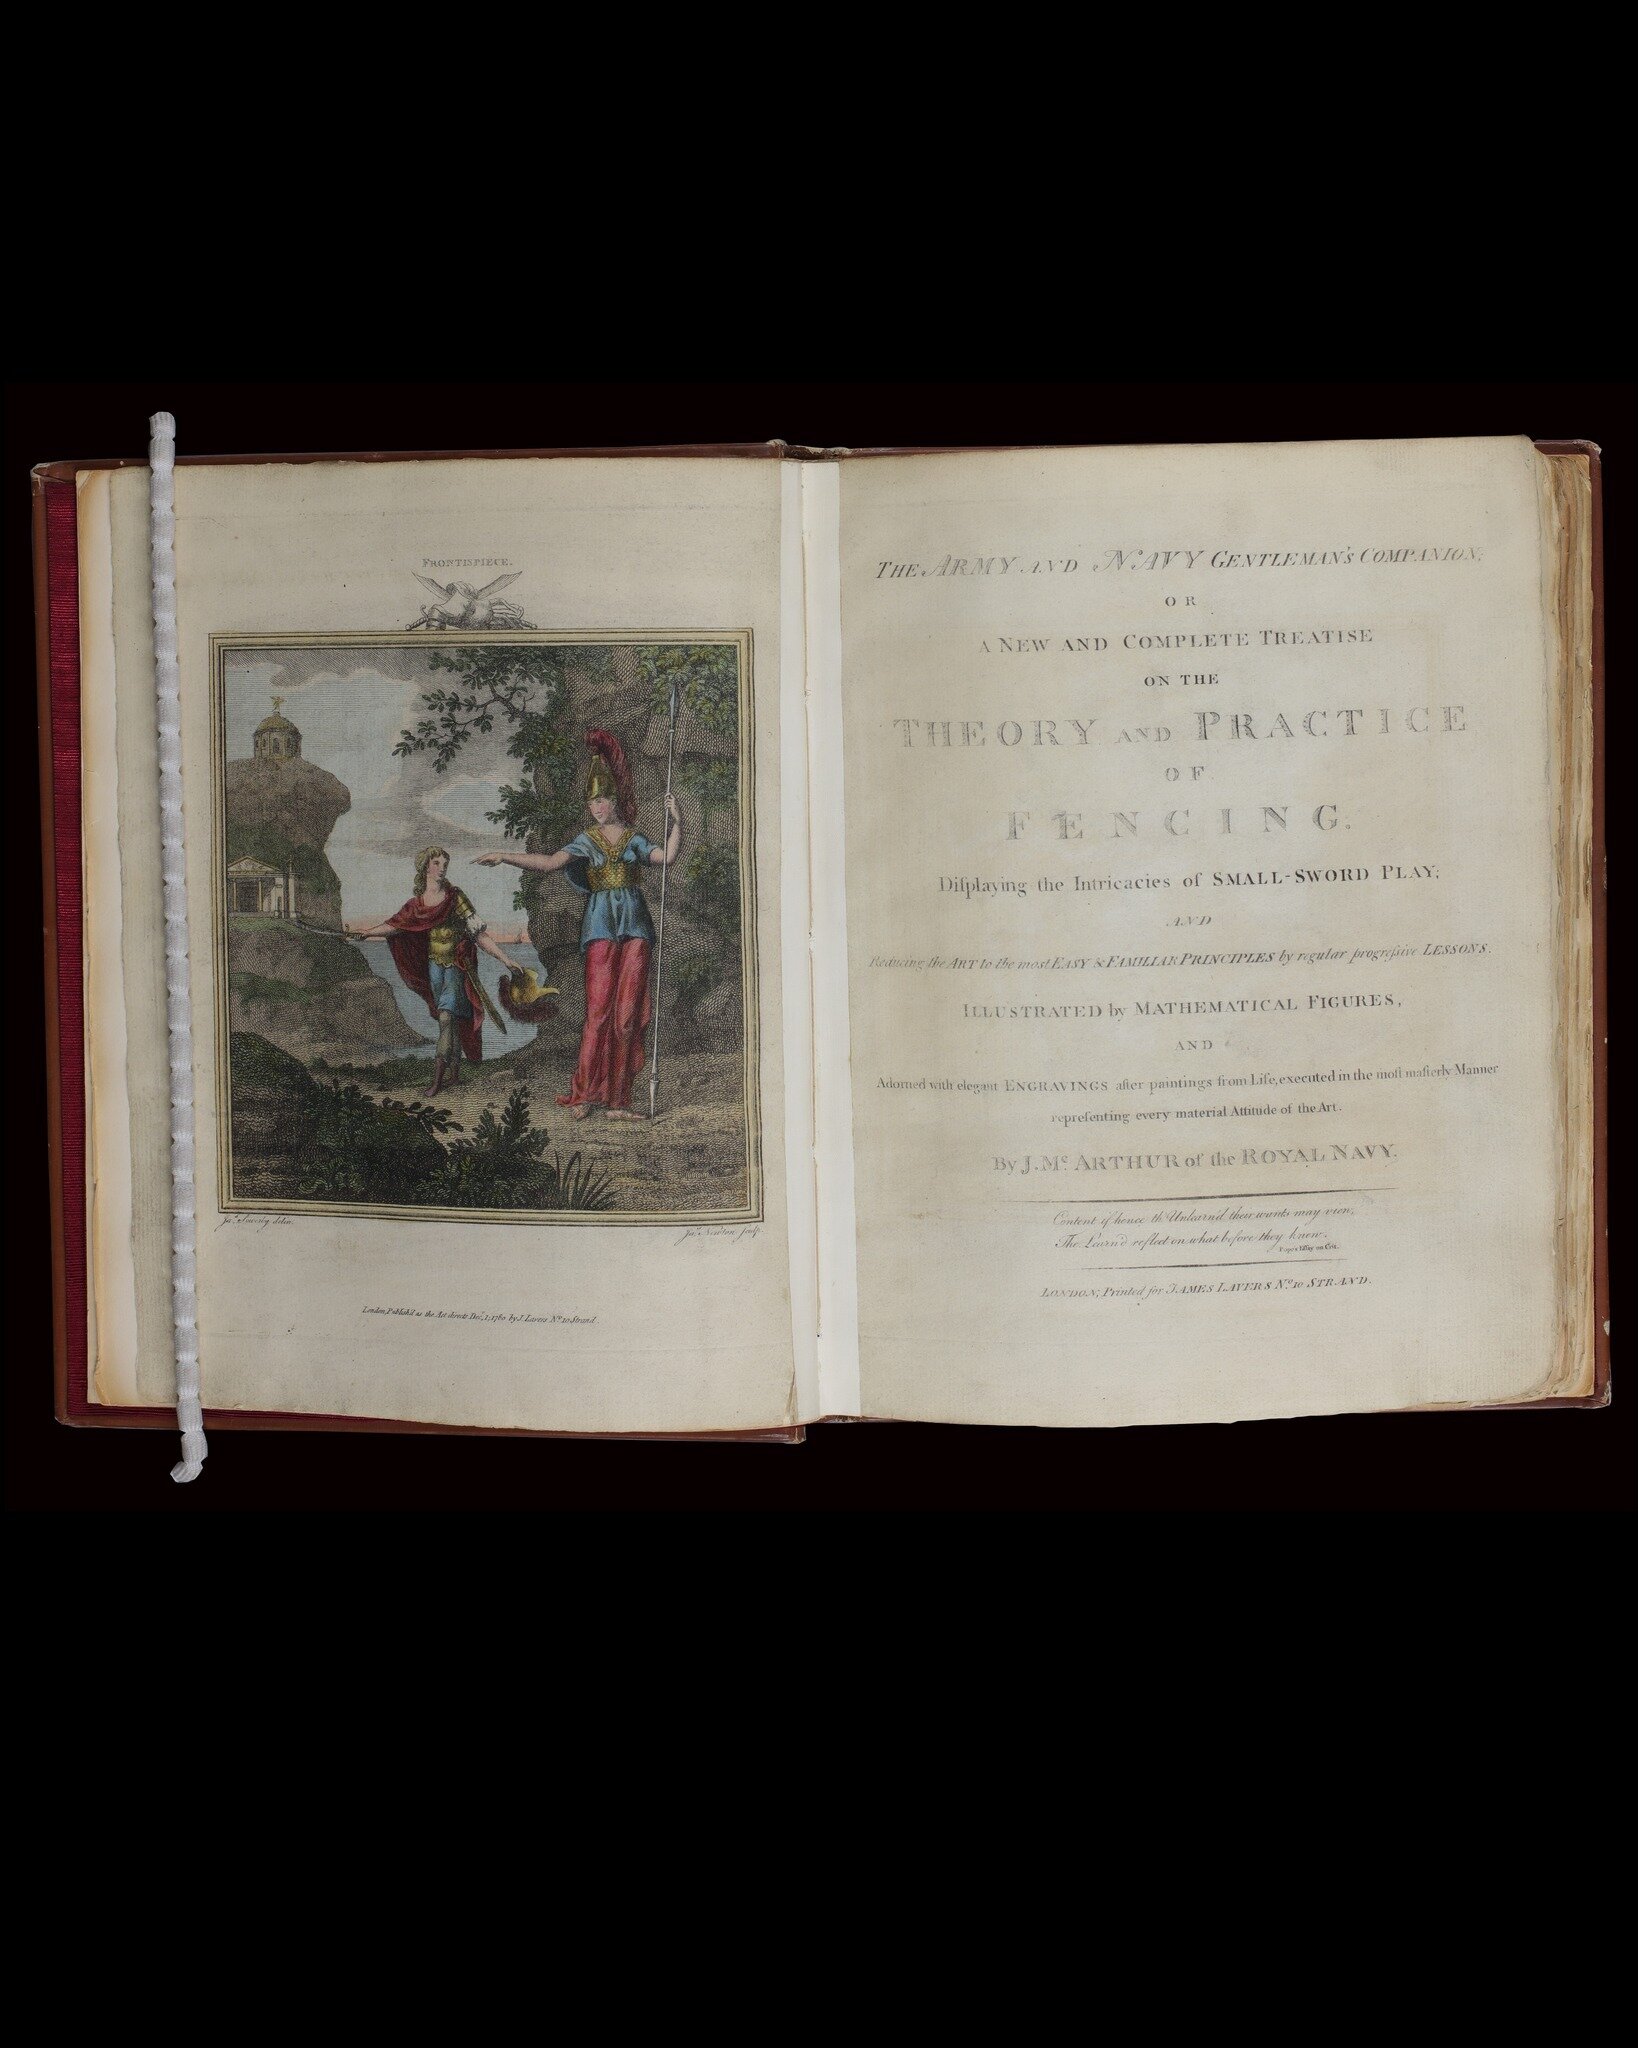 McArthur - The Army and Navy Gentleman's Companion

A first edition copy of The Army and Navy Gentleman's Companion; or A New and Complete Treatise on the Theory and Practice of Fencing. Printed in 1780. This copy has hand coloured engravings and fro